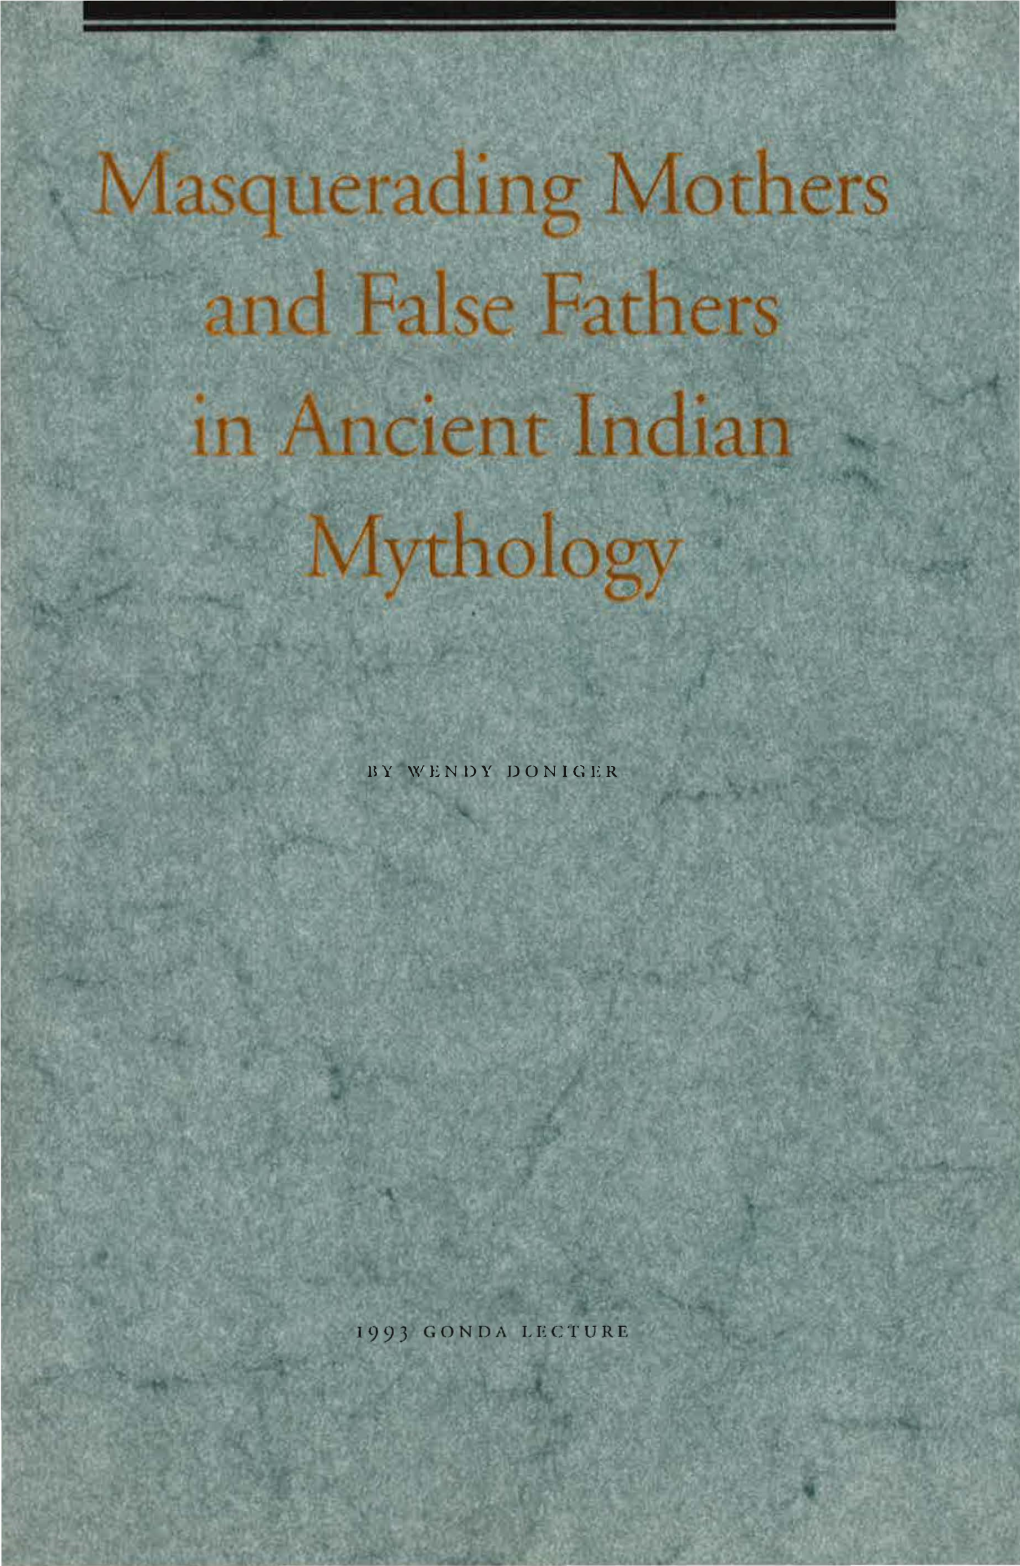 Masquerading Mothers and False Fathers in Ancient Indian Mythology